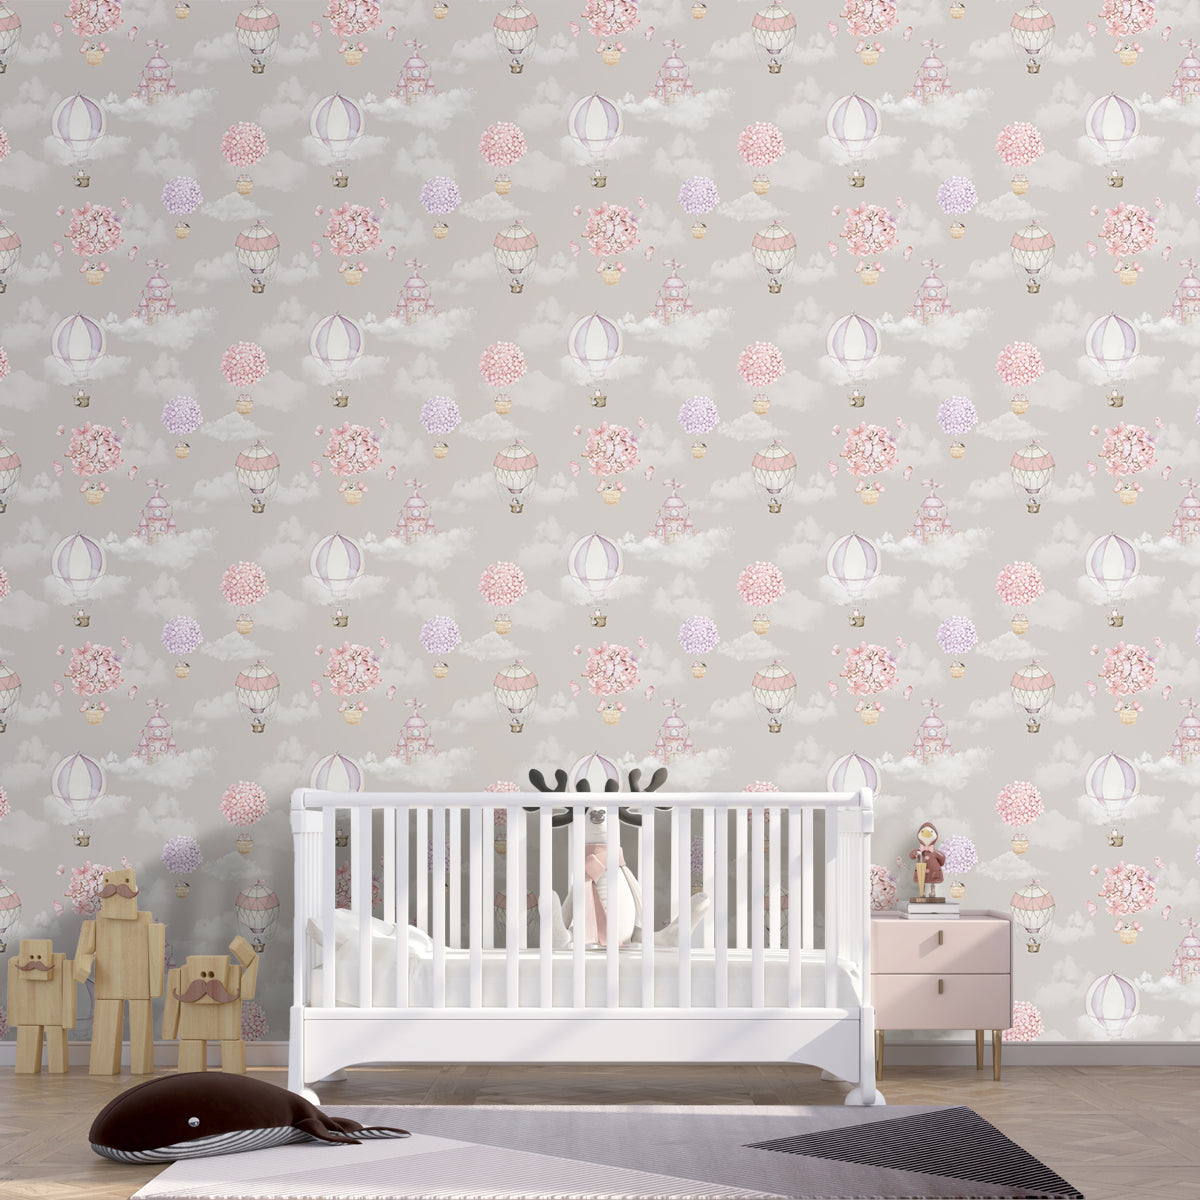 Balloons of Blooms, Adorable Hot Air Balloon Wallpaper for Girls Room, Beige